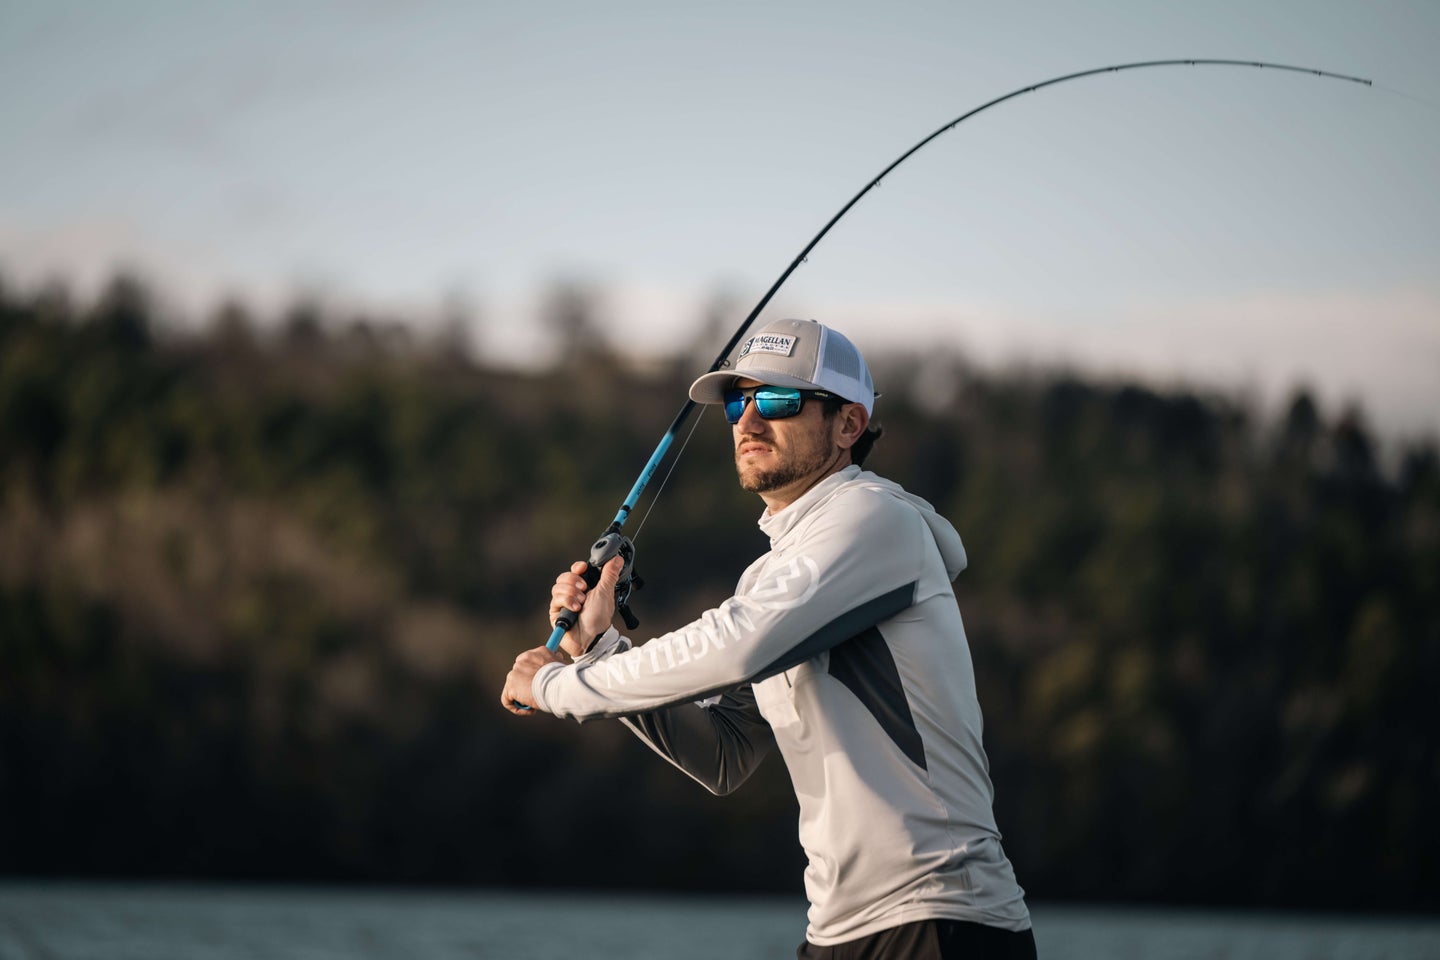 New Fishing Gear for Spring 2022